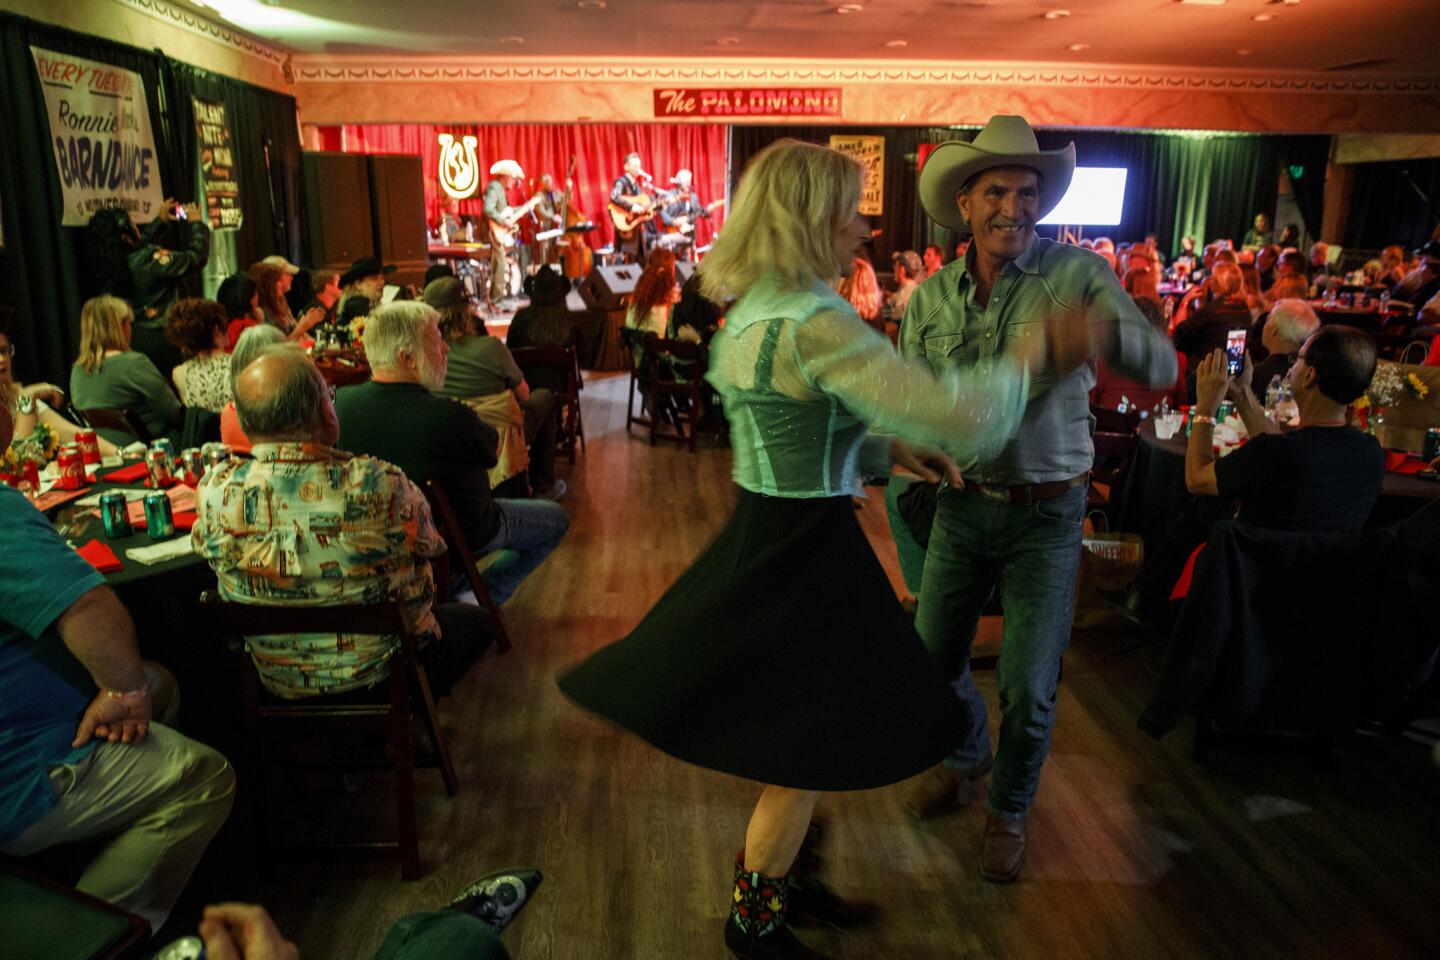 Music and dance at the Palomino Club